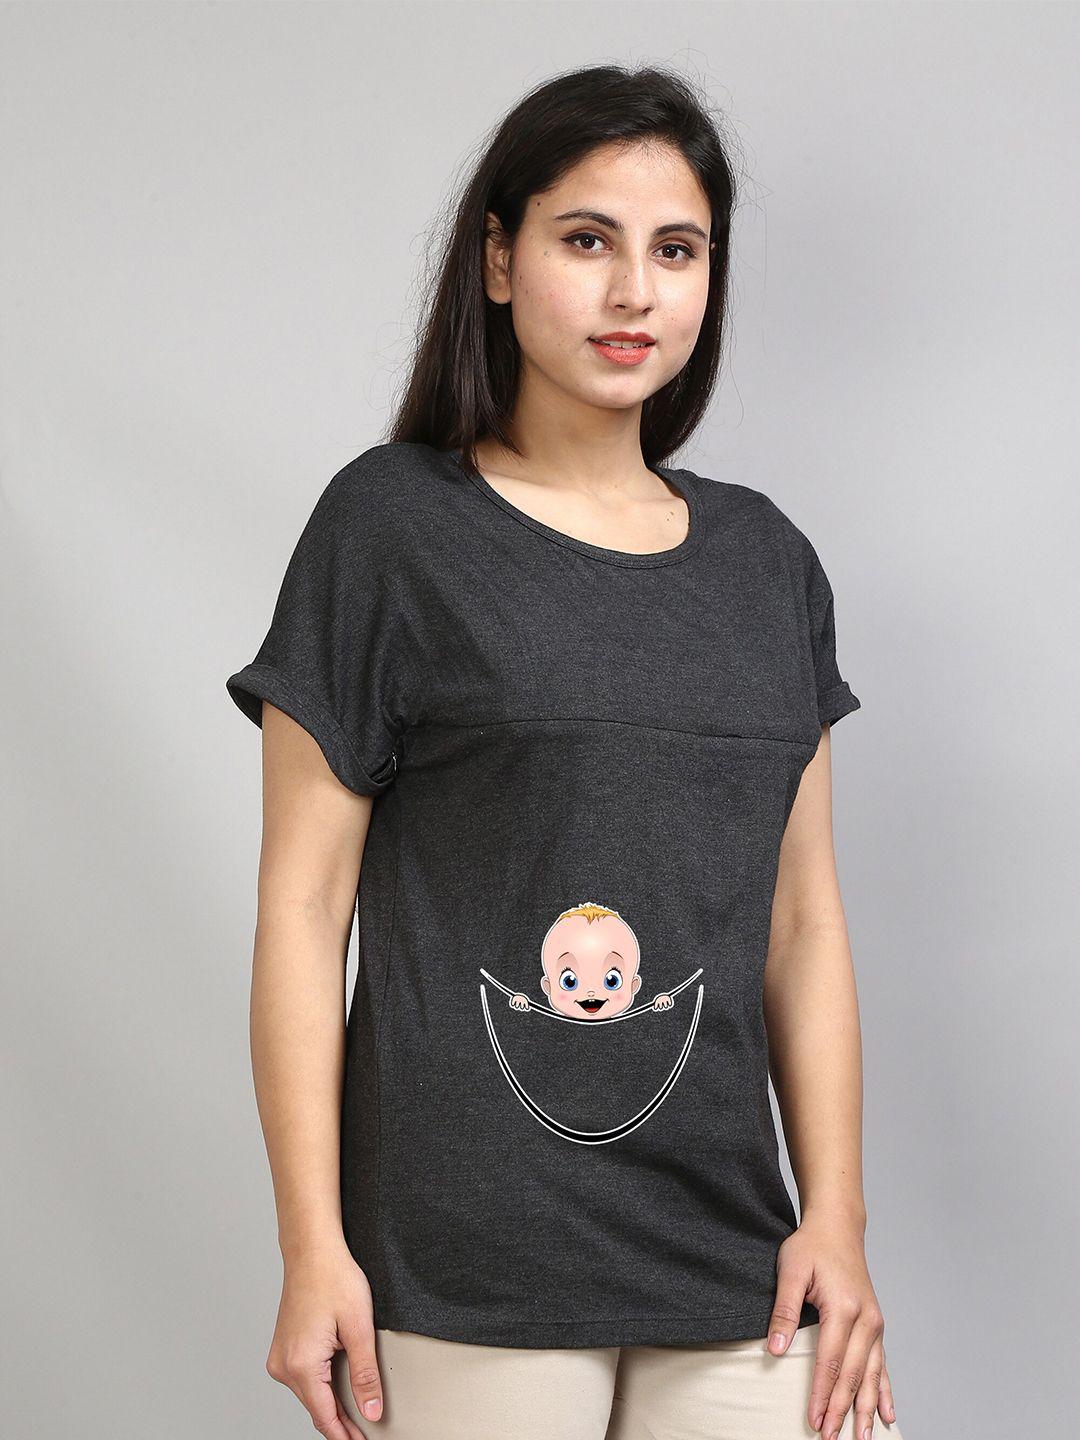 sillyboom graphic printed extended sleeves maternity t-shirt